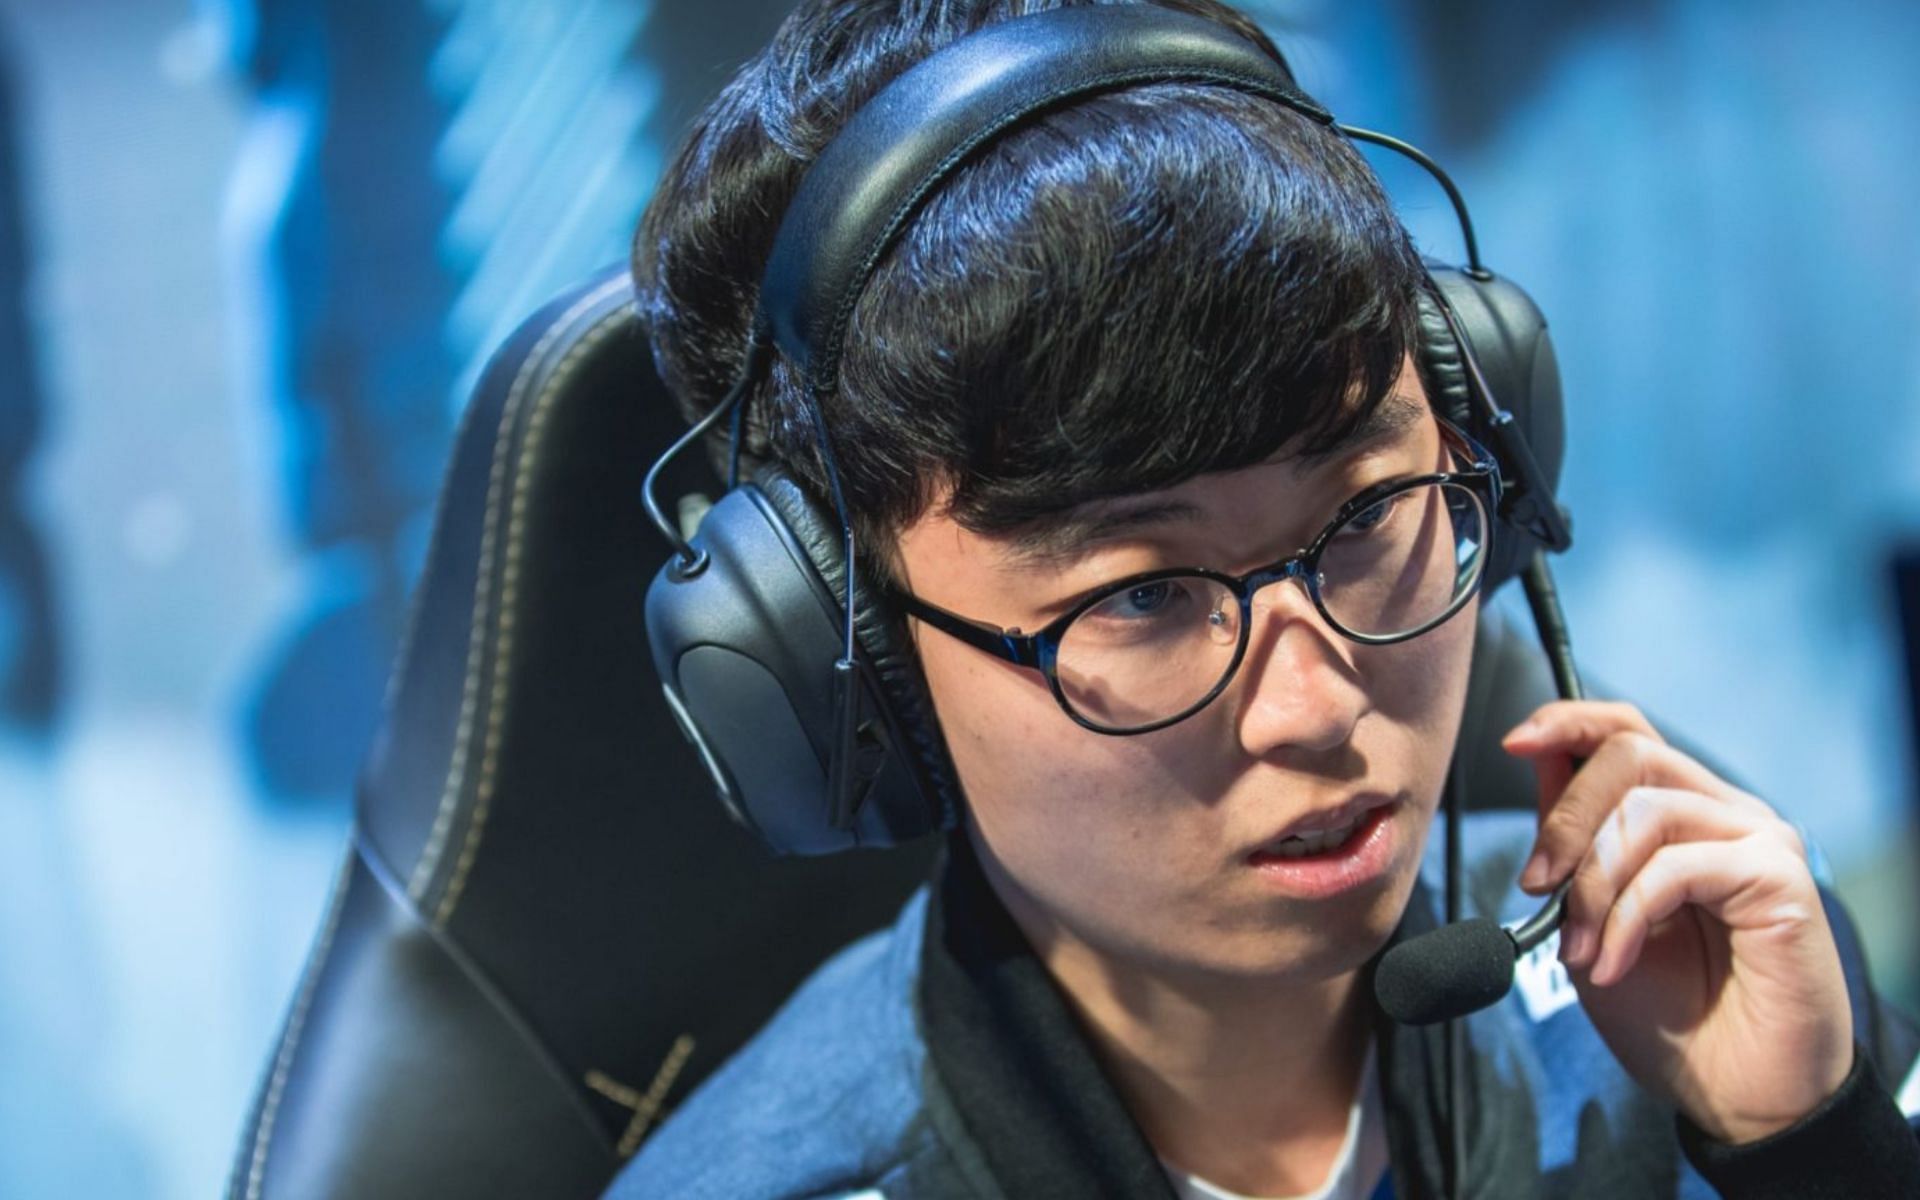 Kiin is the second toplaner in LCK to achieve 1000 kills (Image via Riot Games)